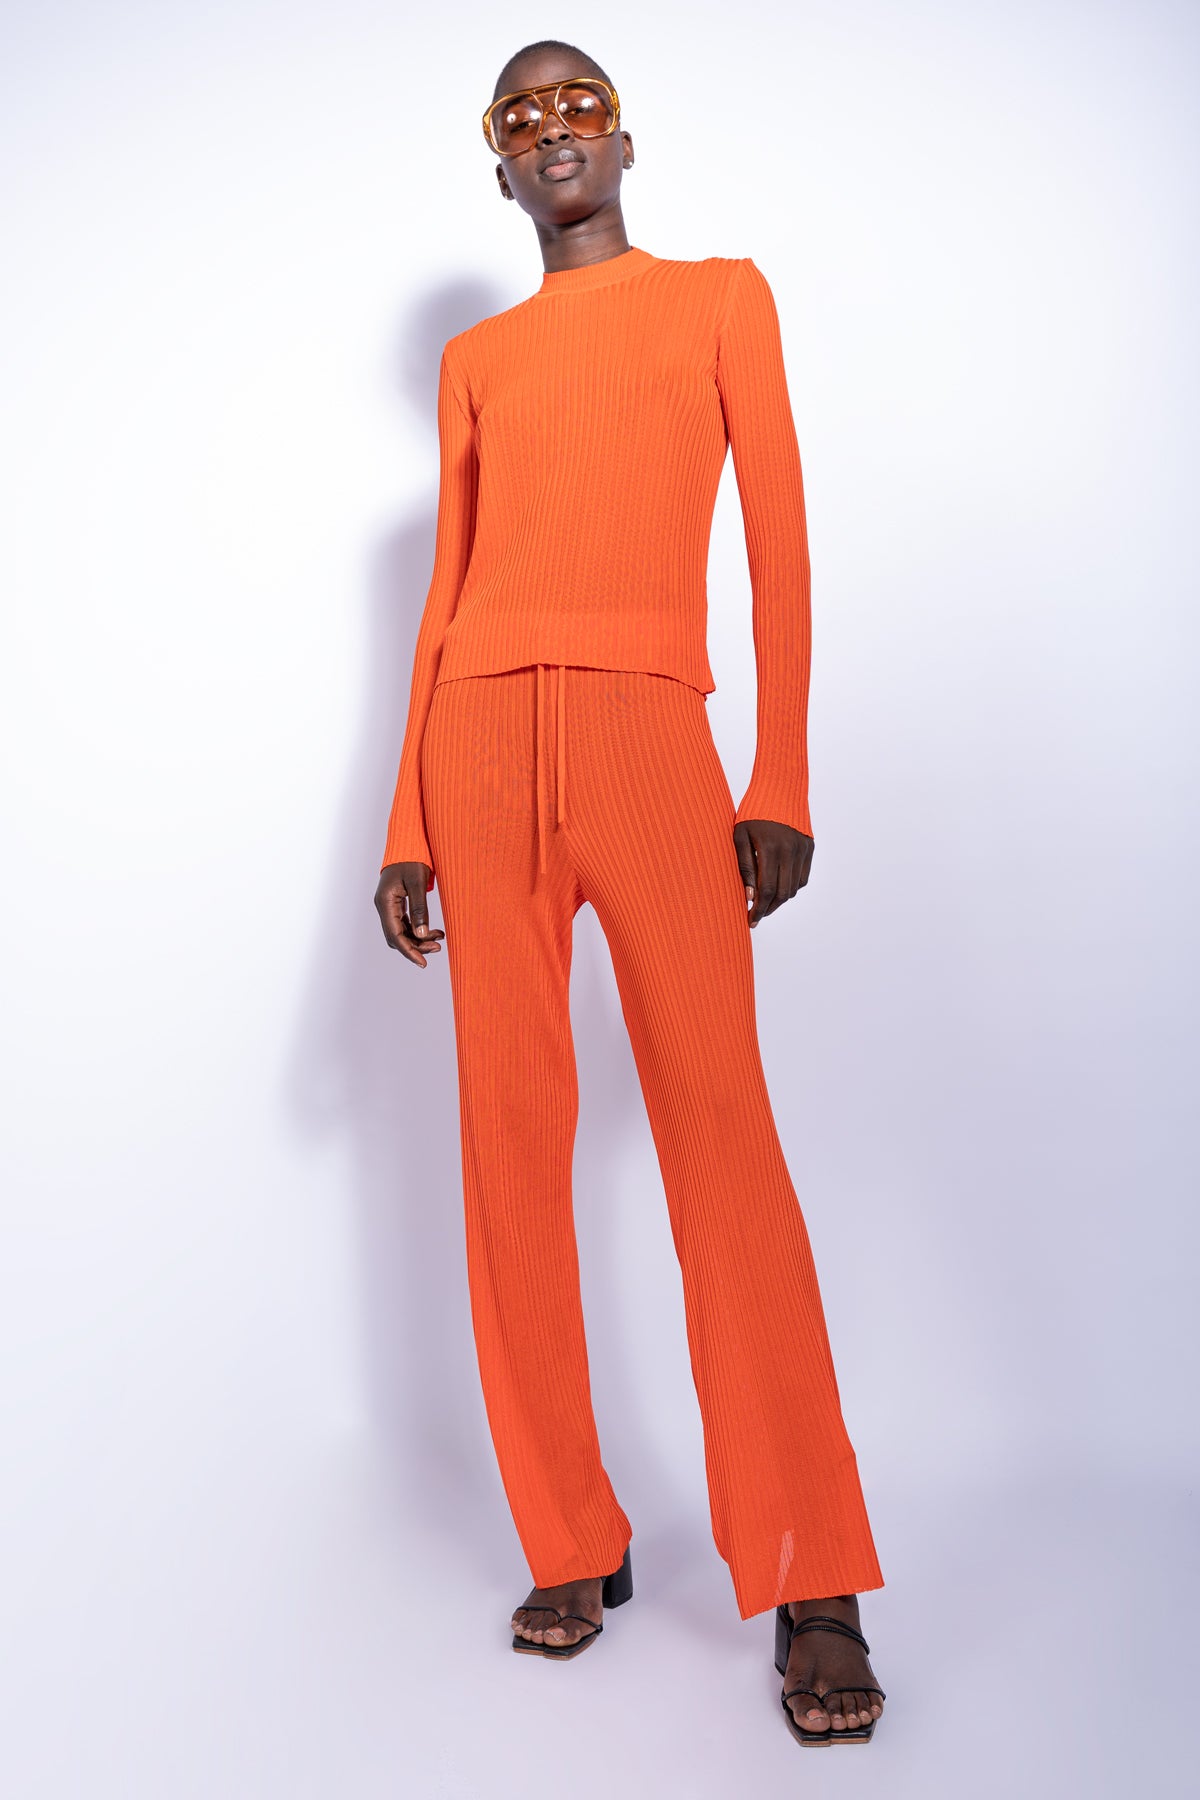  ORANGE KNITTED TROUSERS IN LIGHT WEIGHT KNIT marques almeida